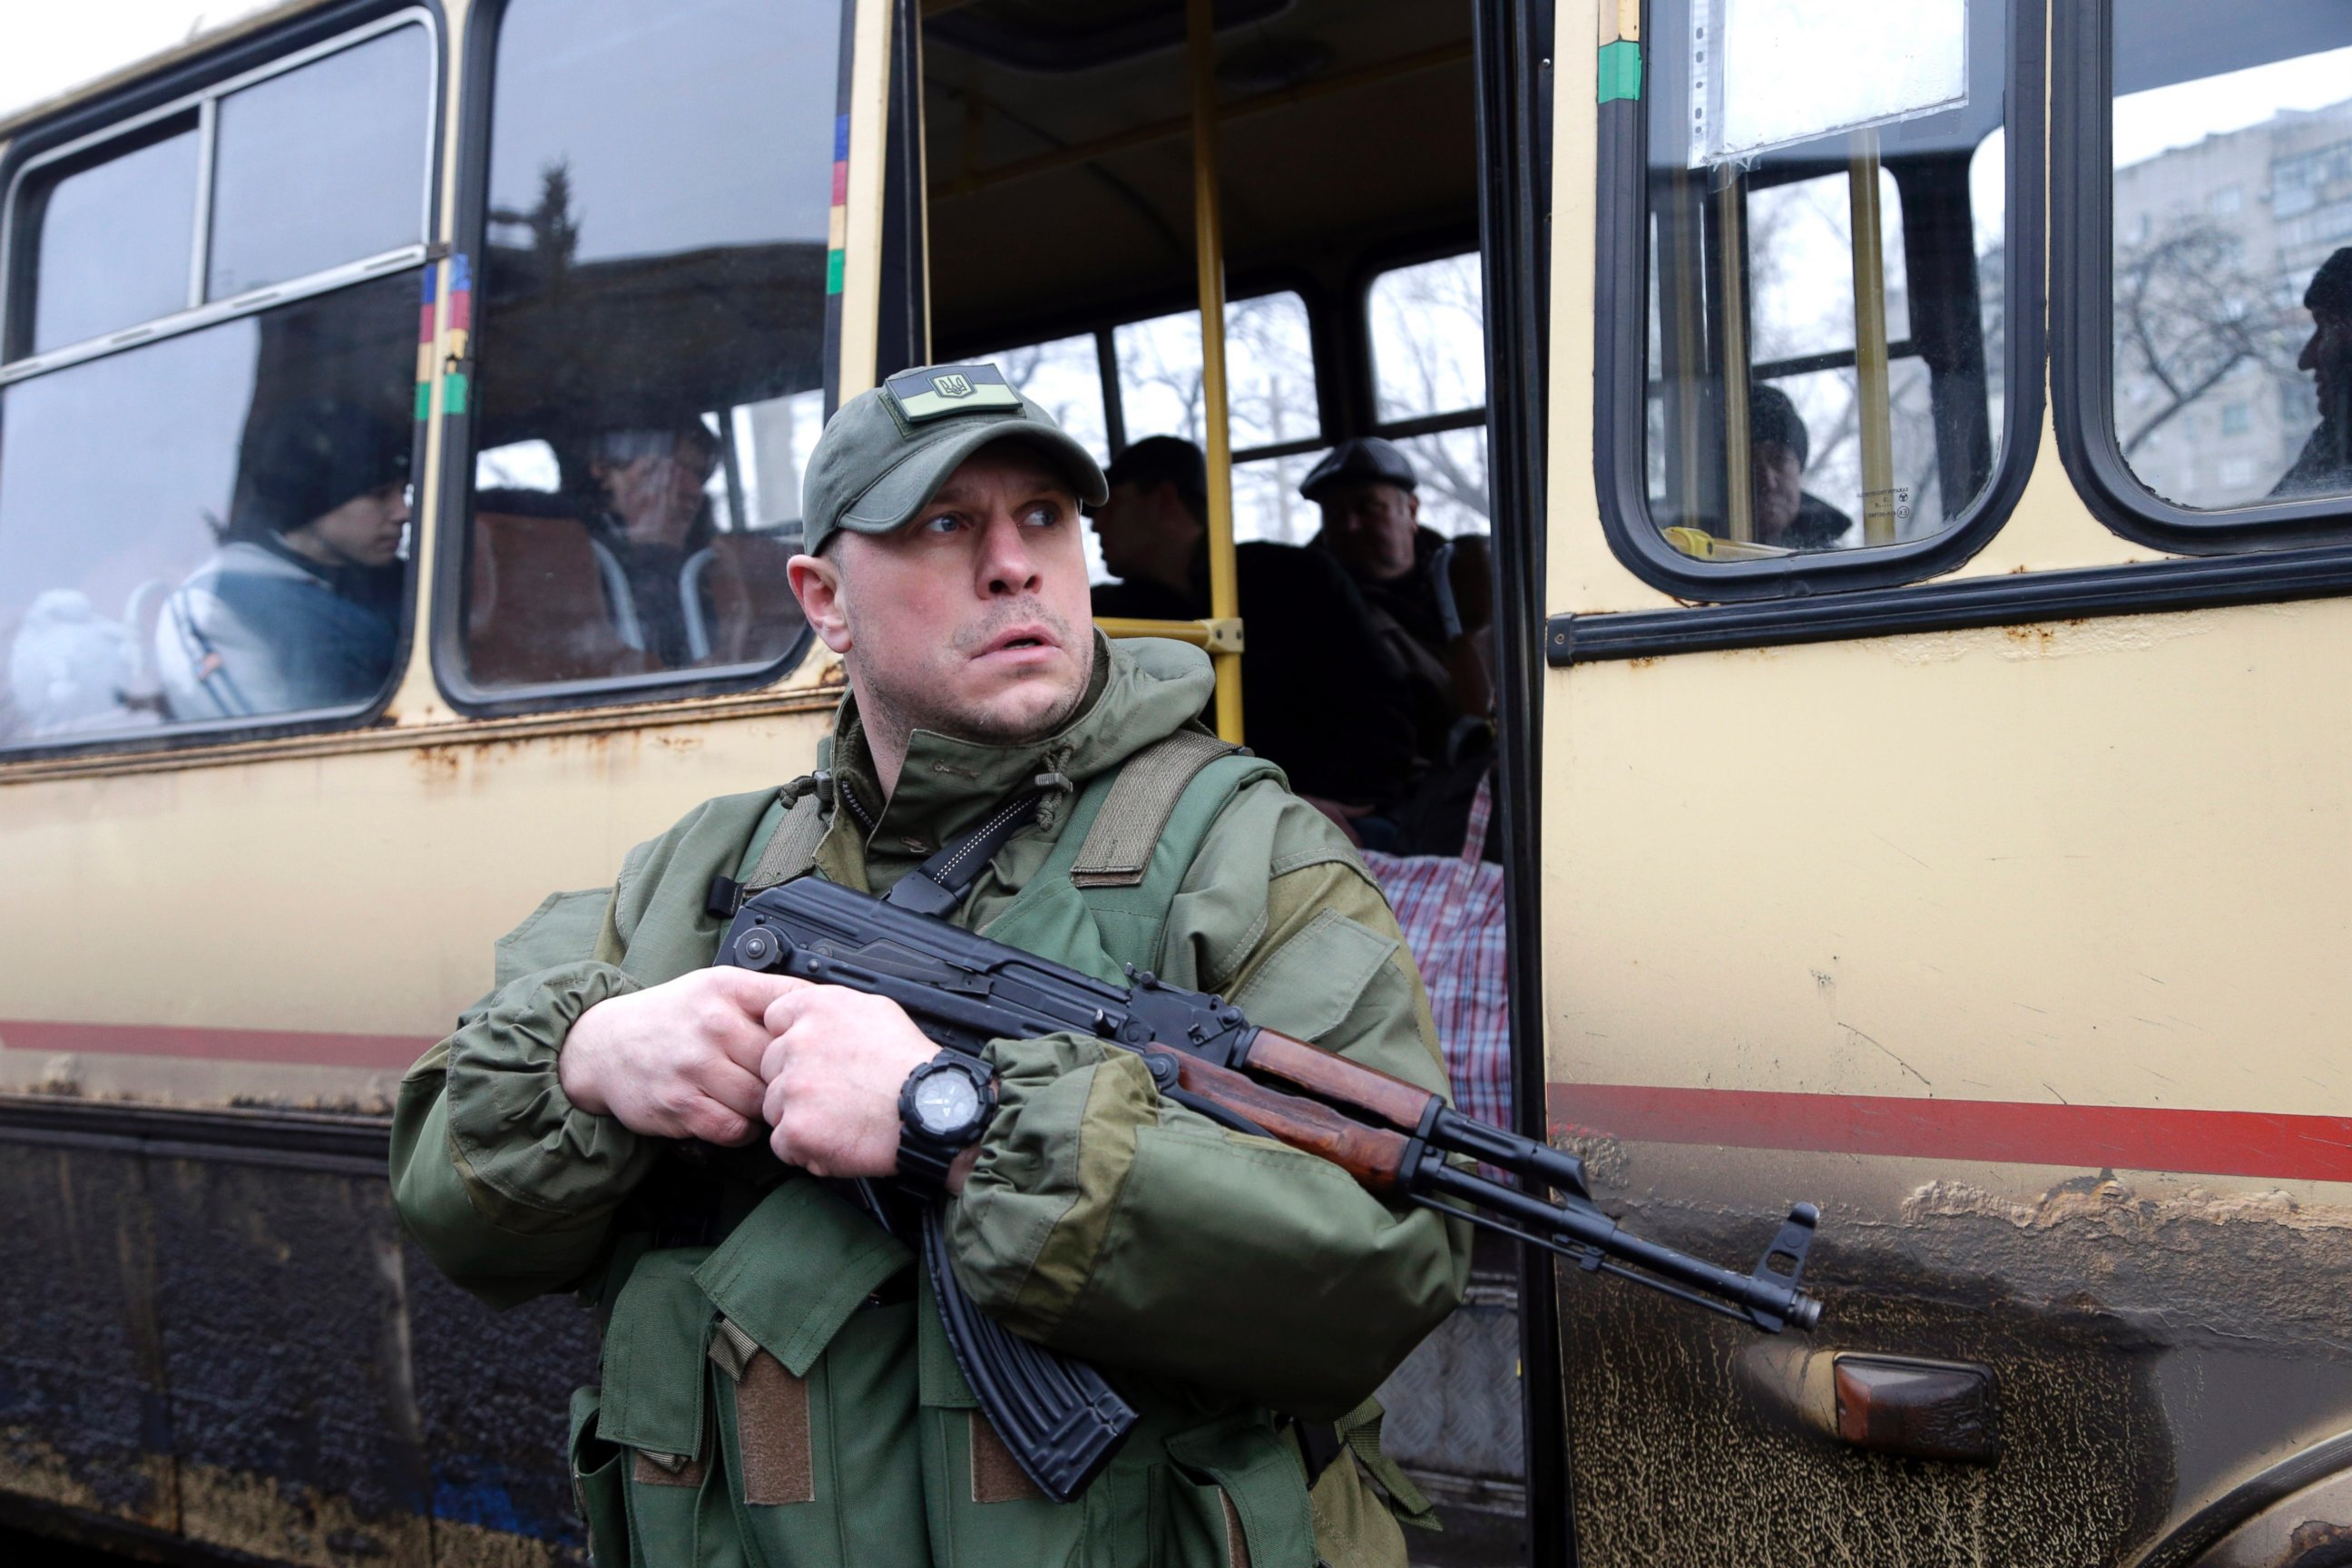 PHOTO: A Ukrainian soldier holds a weapon as people wait on a bus to leave the town of Debaltseve, Ukraine on Feb. 3, 2015.